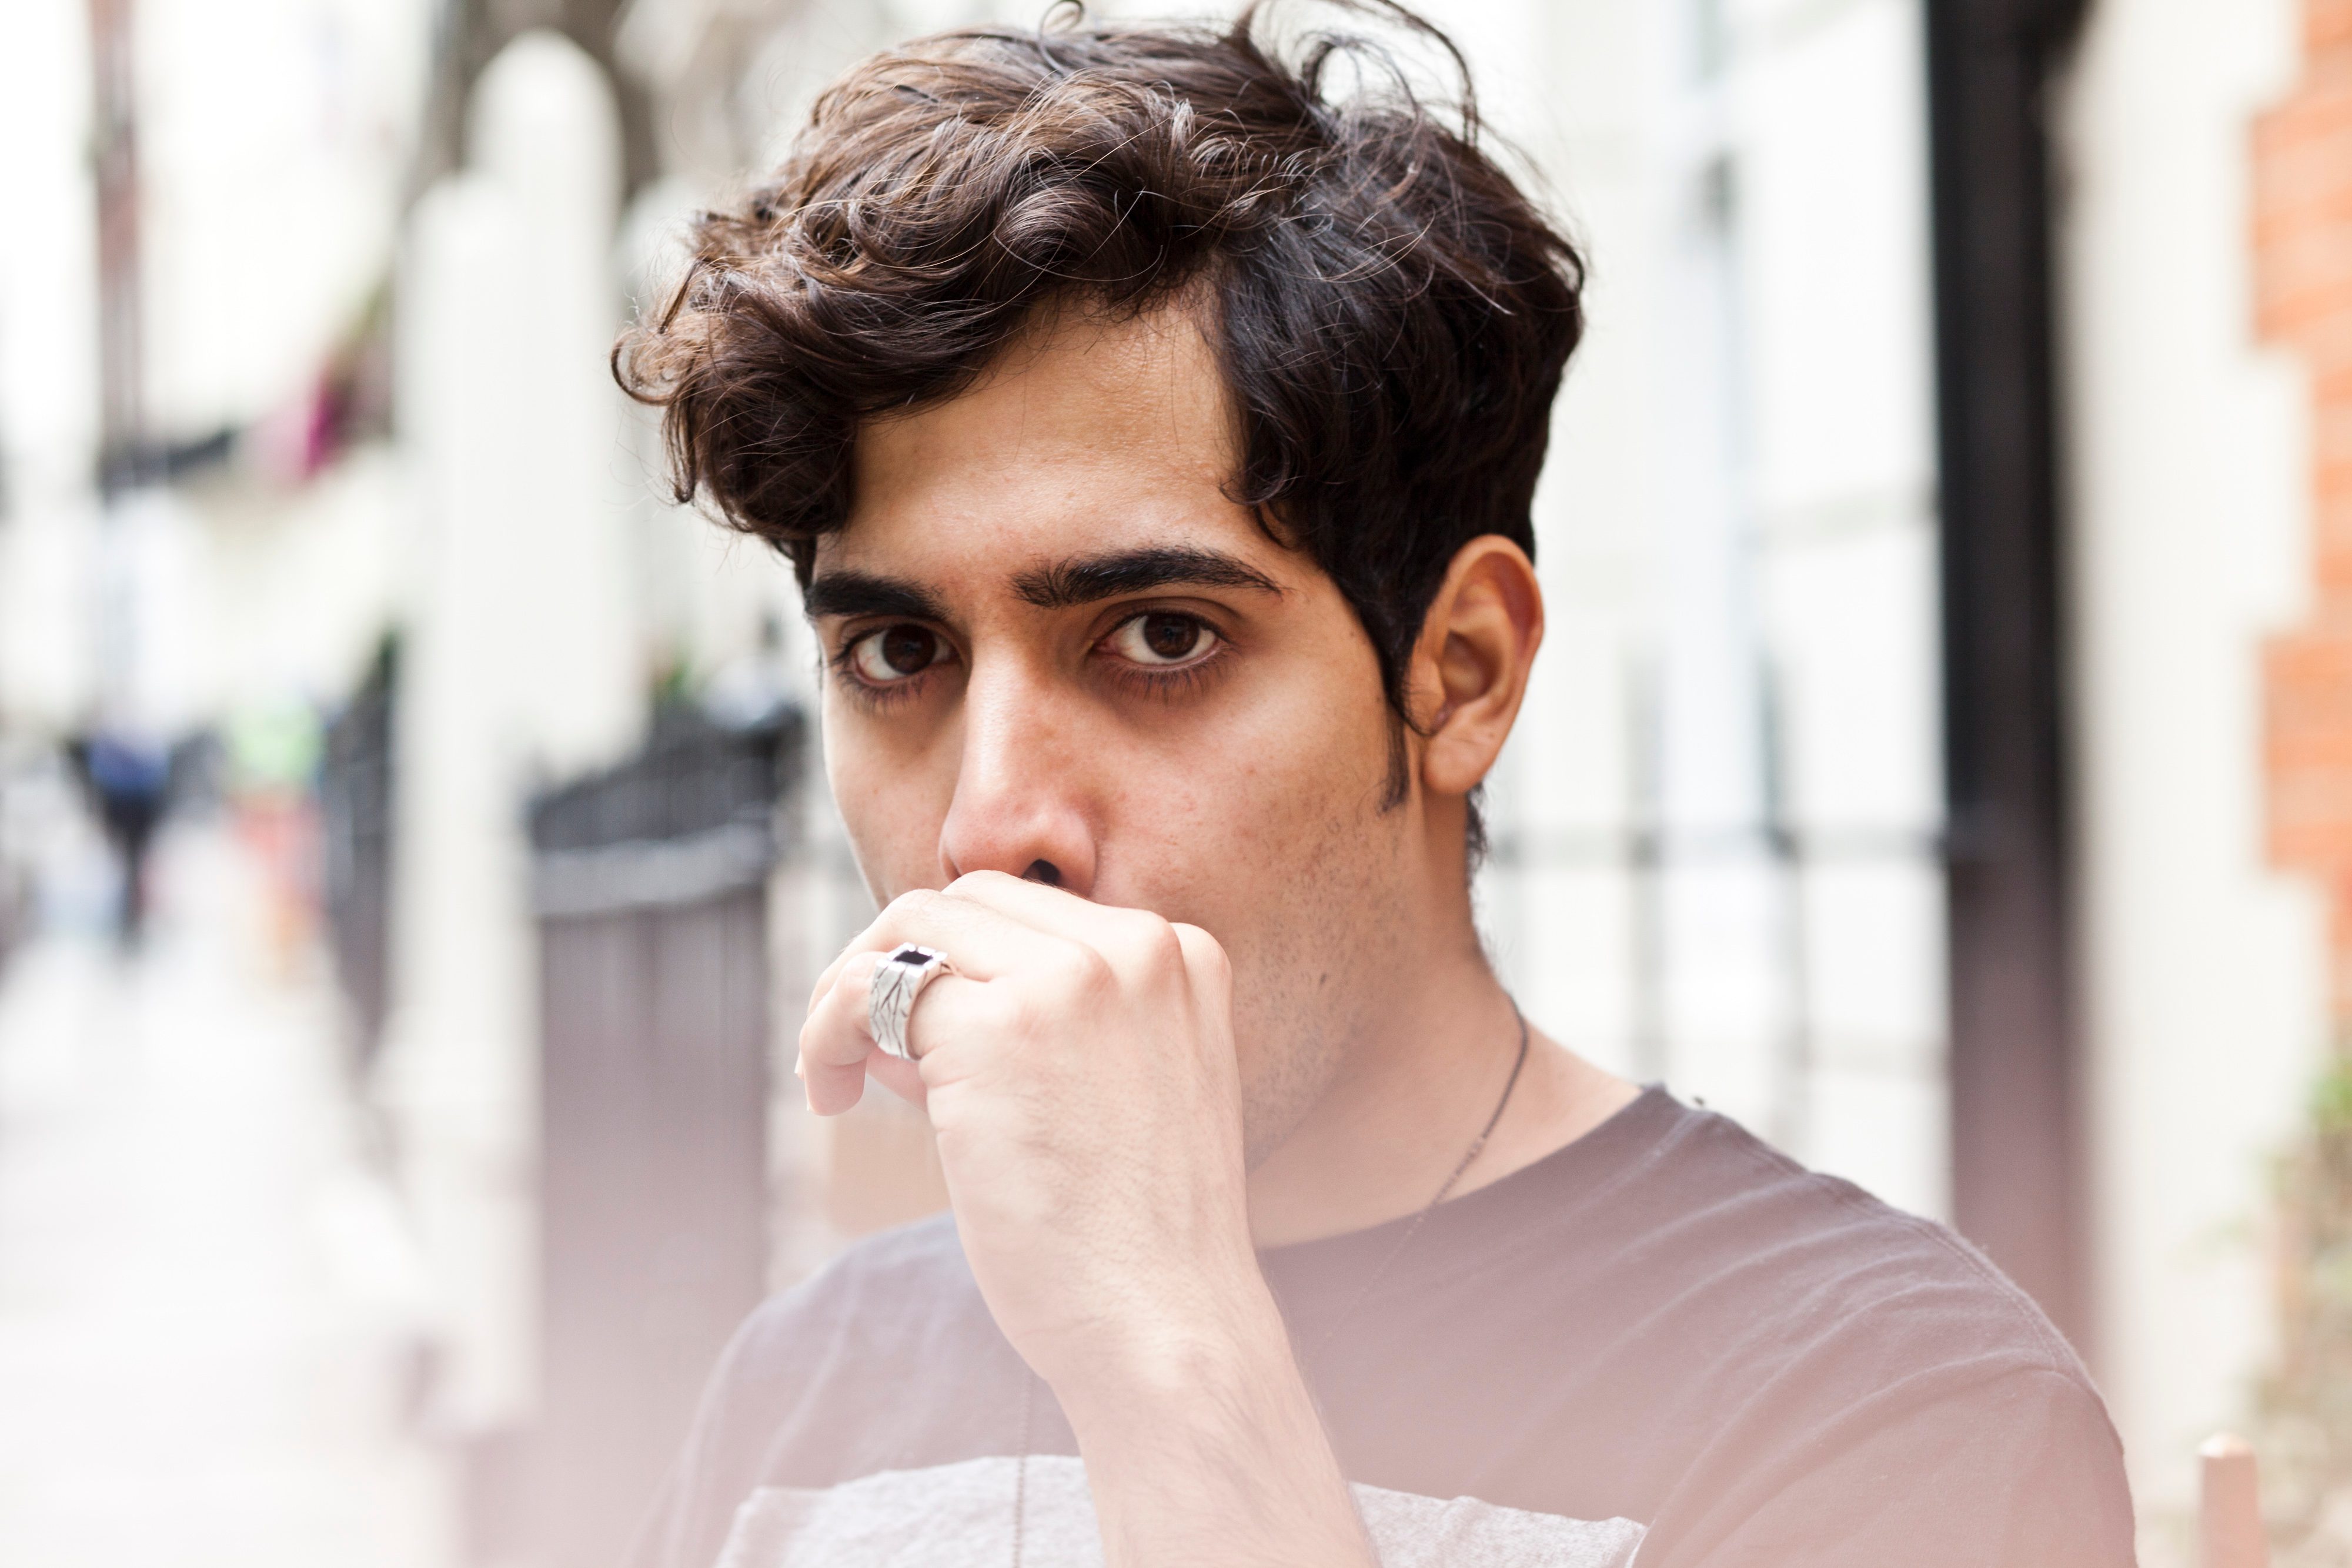 Alan Palomo on his new album 'World of Hassle' and his love for